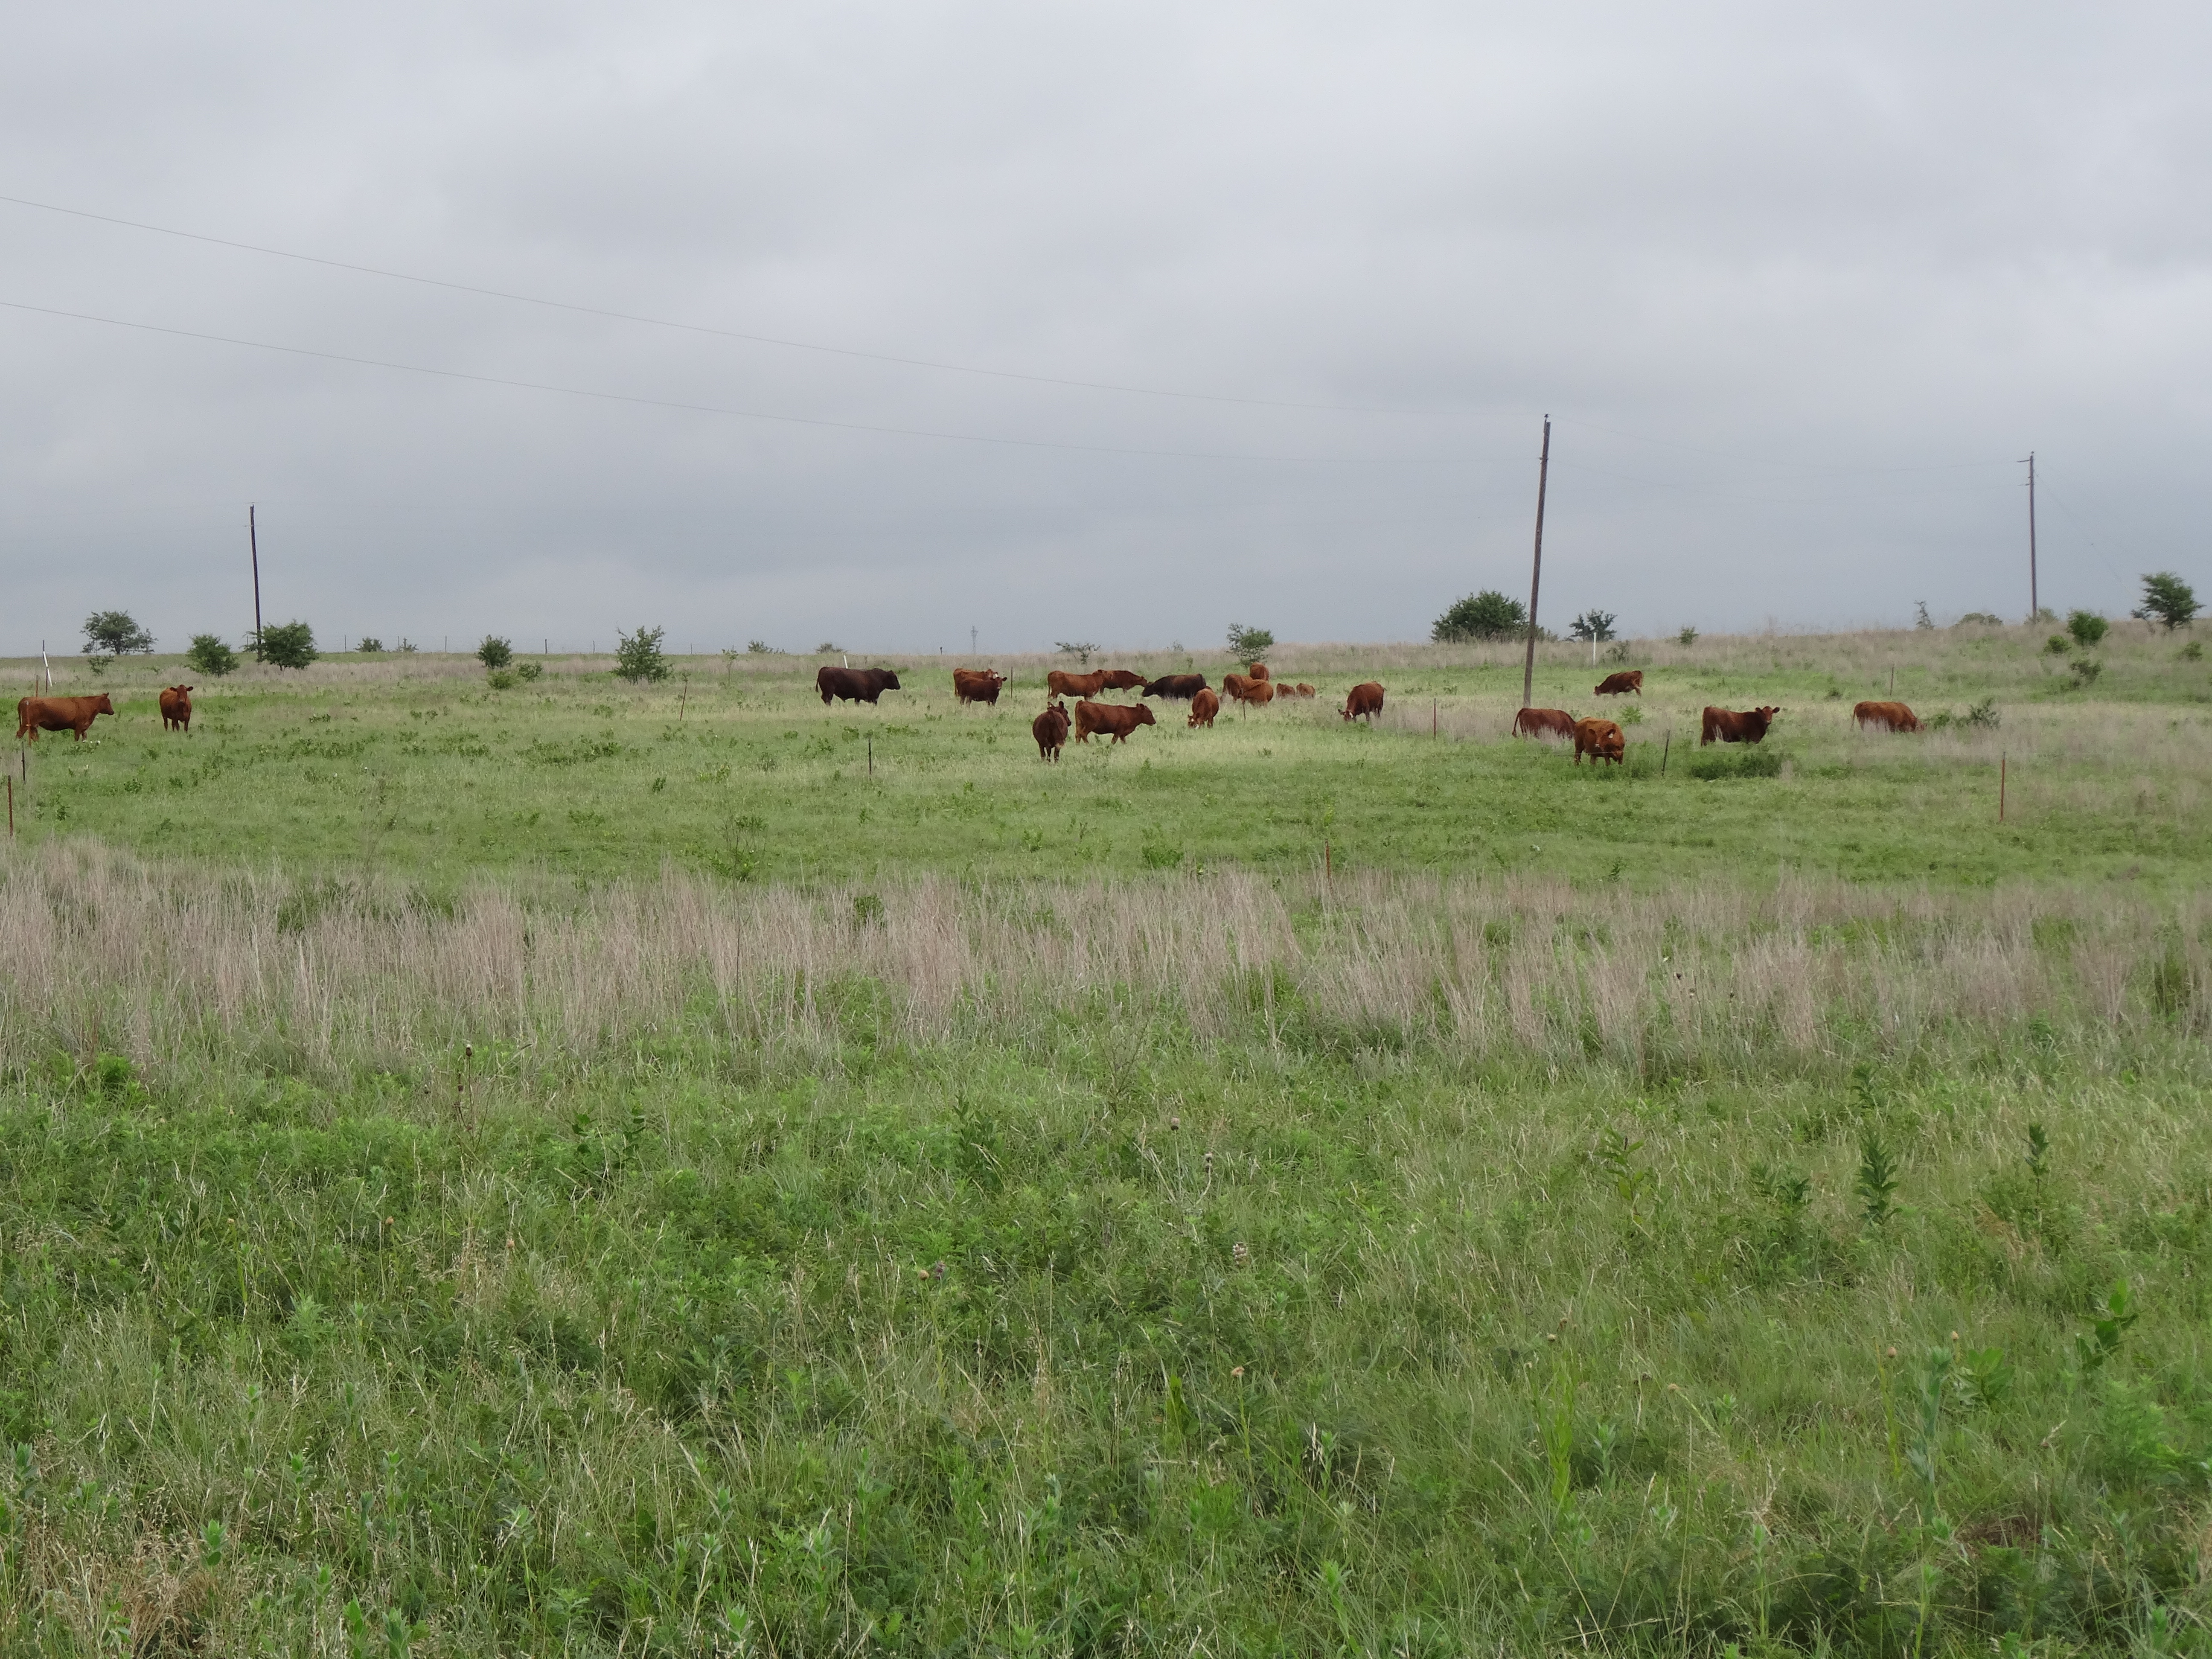 Multi-paddock grazing has been shown to be an effective conservation practice on grazing lands for enhancing water conservation and protecting water quality. (Texas A&M AgriLife photo by Kay Ledbetter)